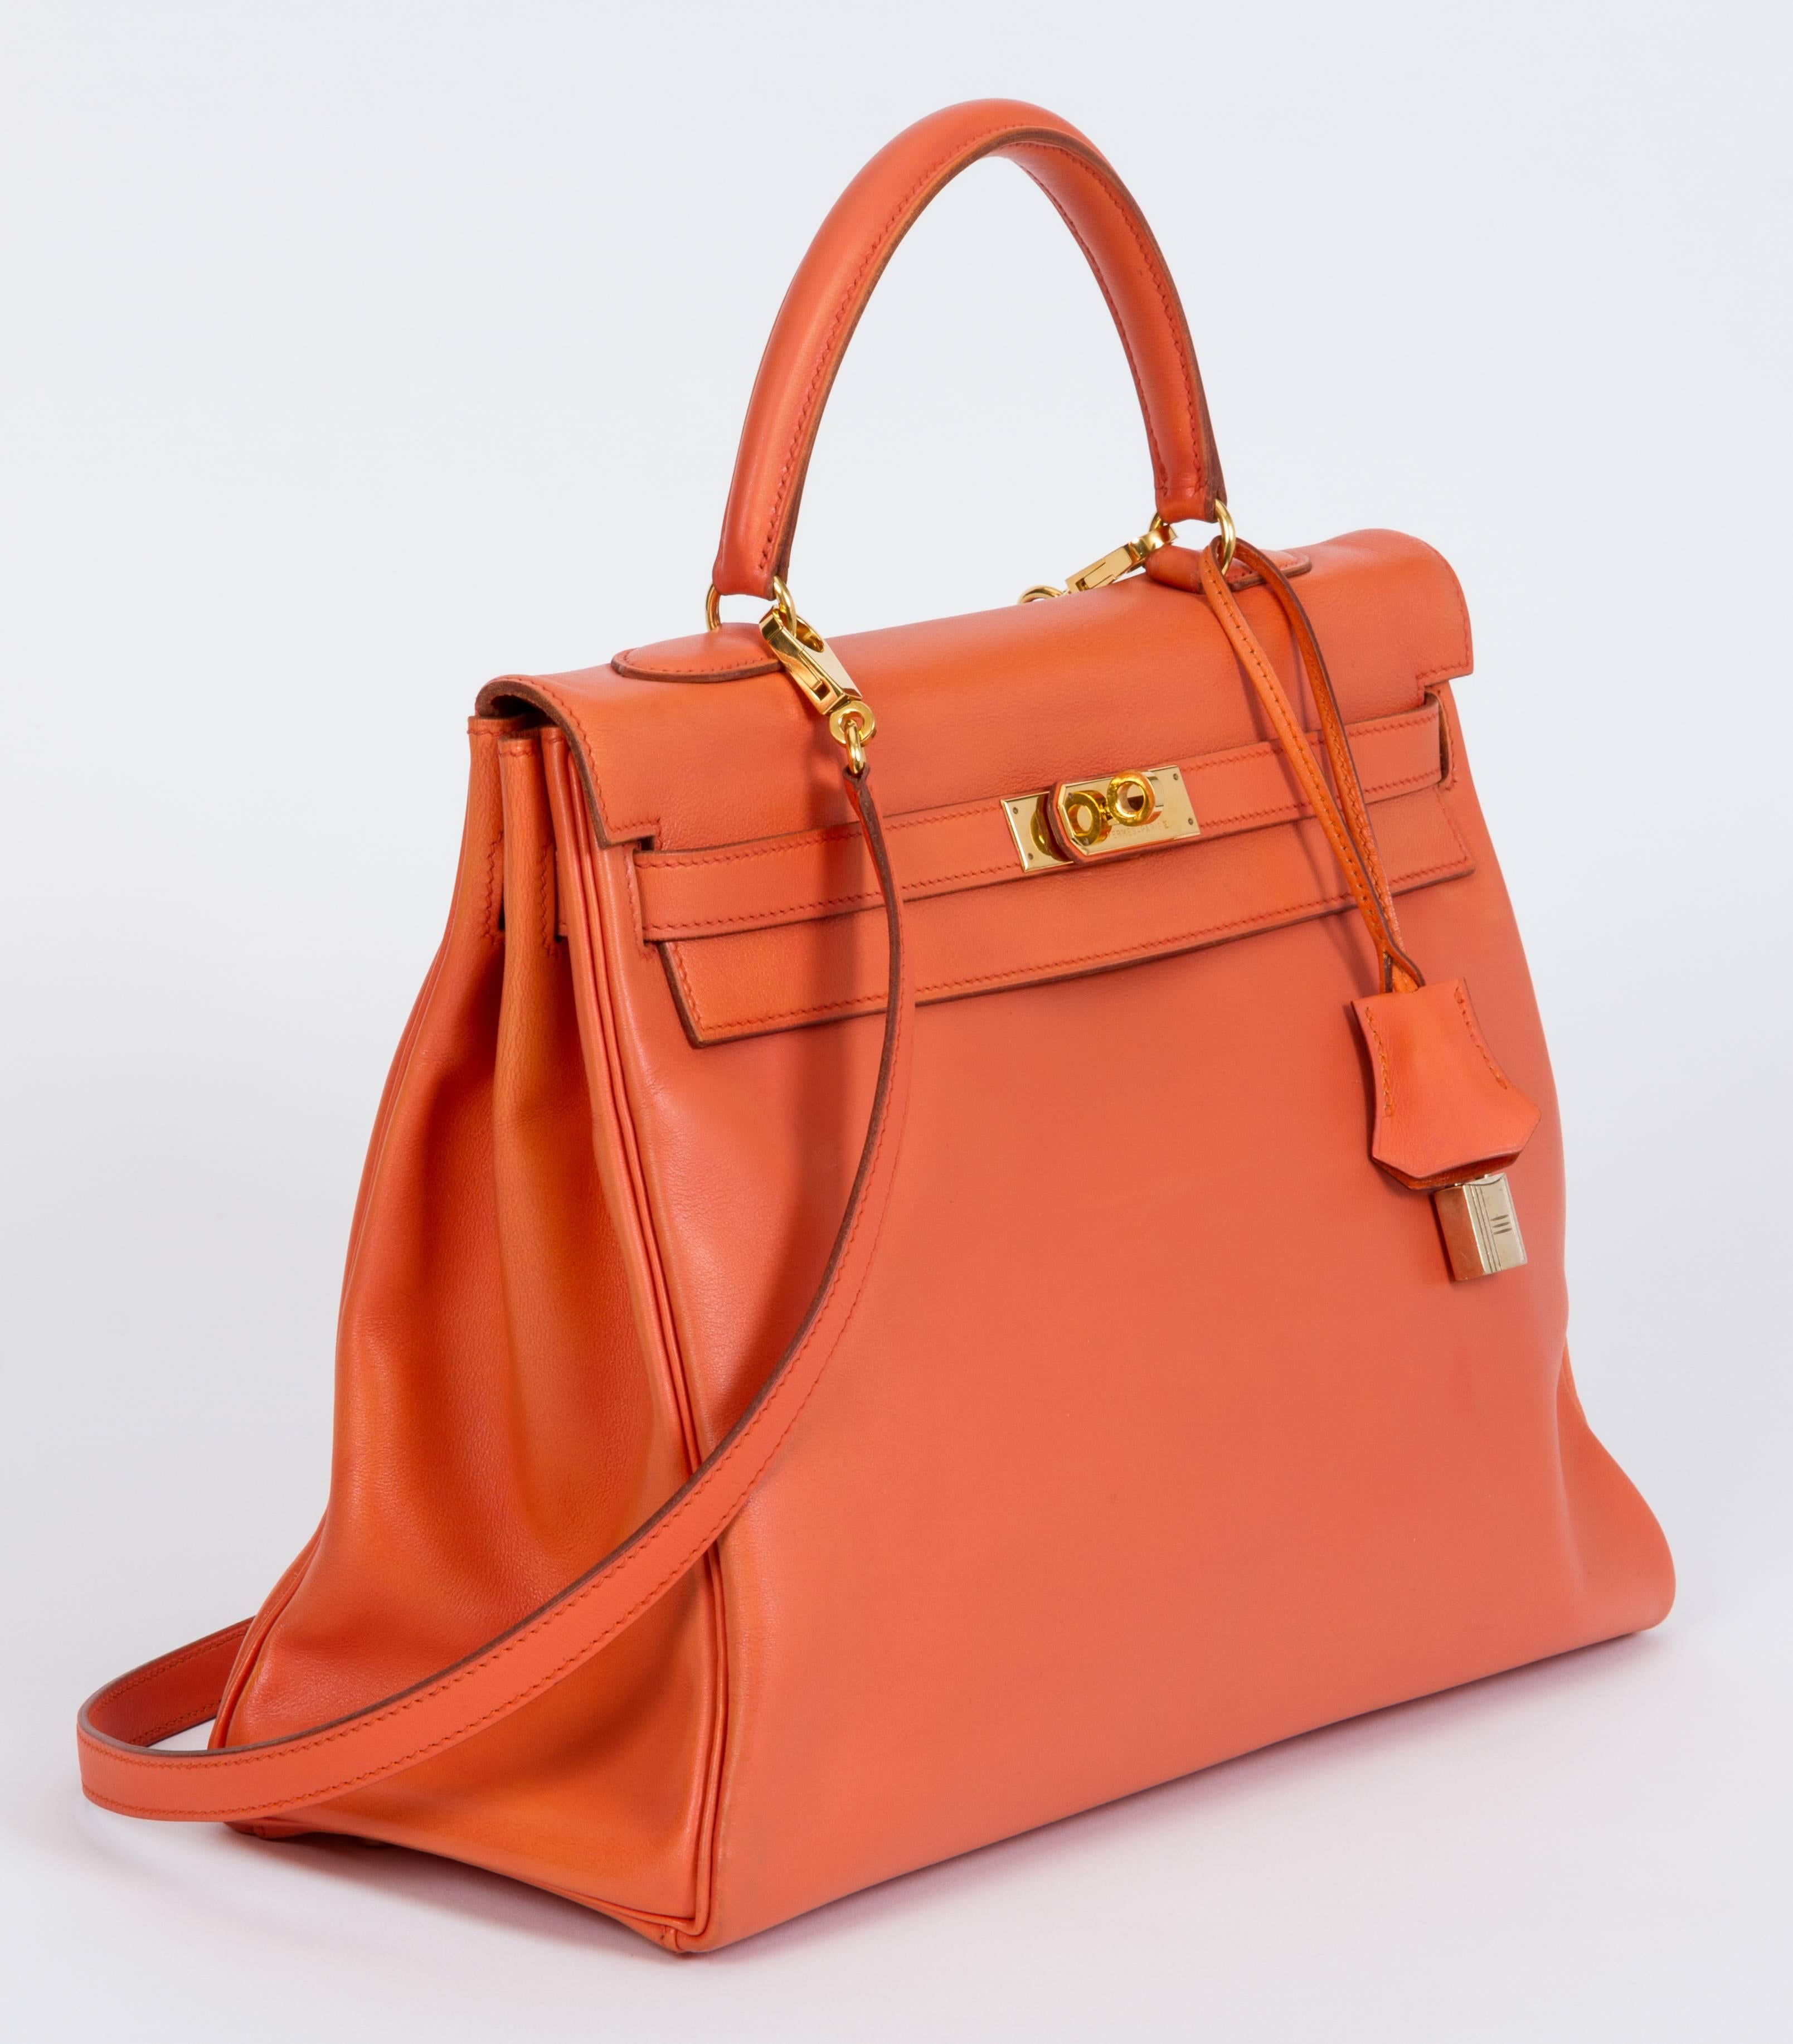 Authentic vintage classic Hermes Kelly bag, 35 cm, in gulliver orange leather and gold tone hardware. Dated Z in a circle for 1996, this bag has been professionally redied. Comes with detachable strap that measures 35